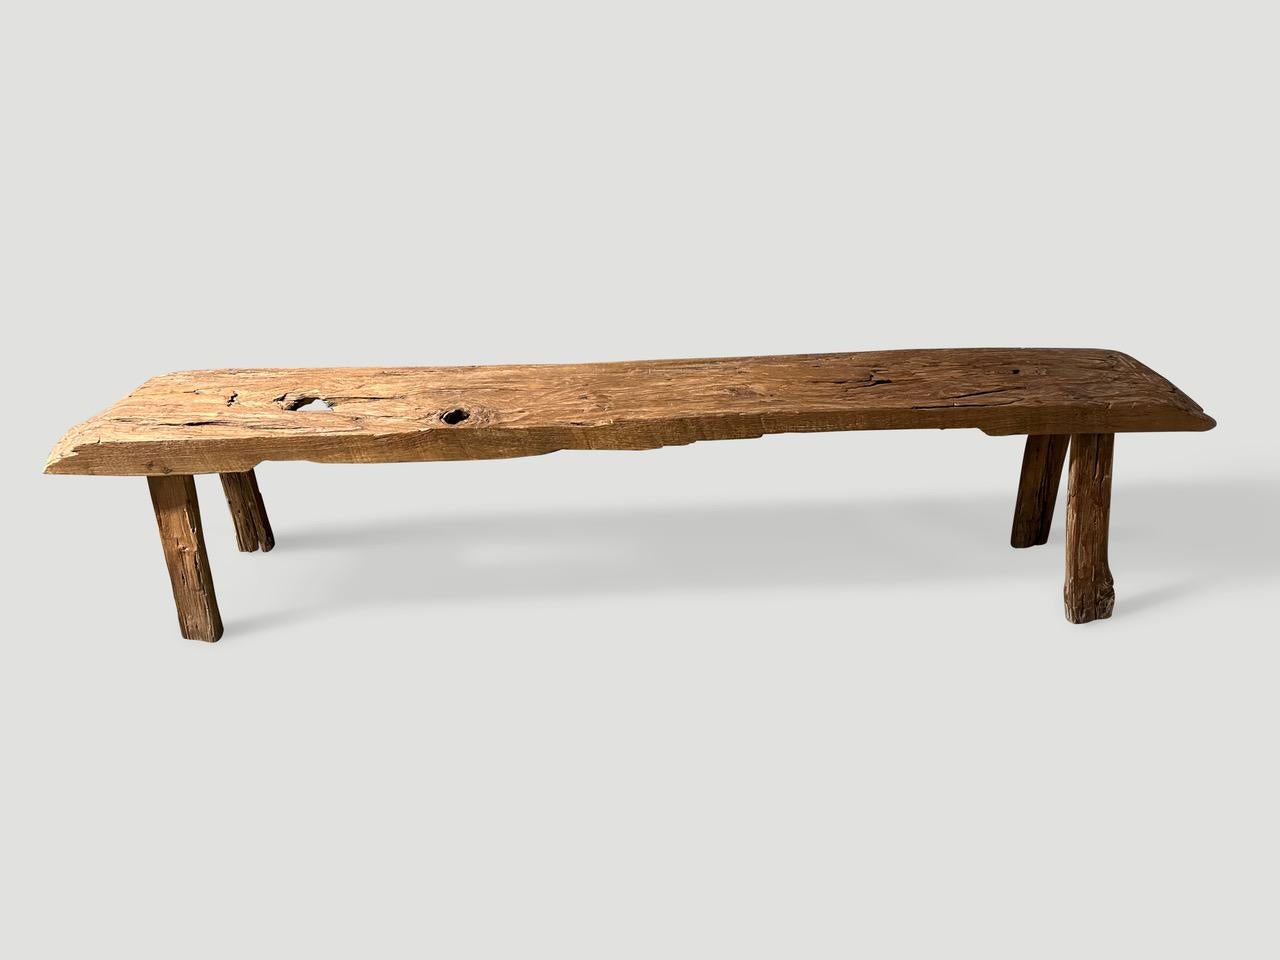 Impressive antique bench with beautiful character and patina hand made from a single three inch thick teak log. Circa 1950.

This bench was hand made in the spirit of Wabi-Sabi, a Japanese philosophy that beauty can be found in imperfection and